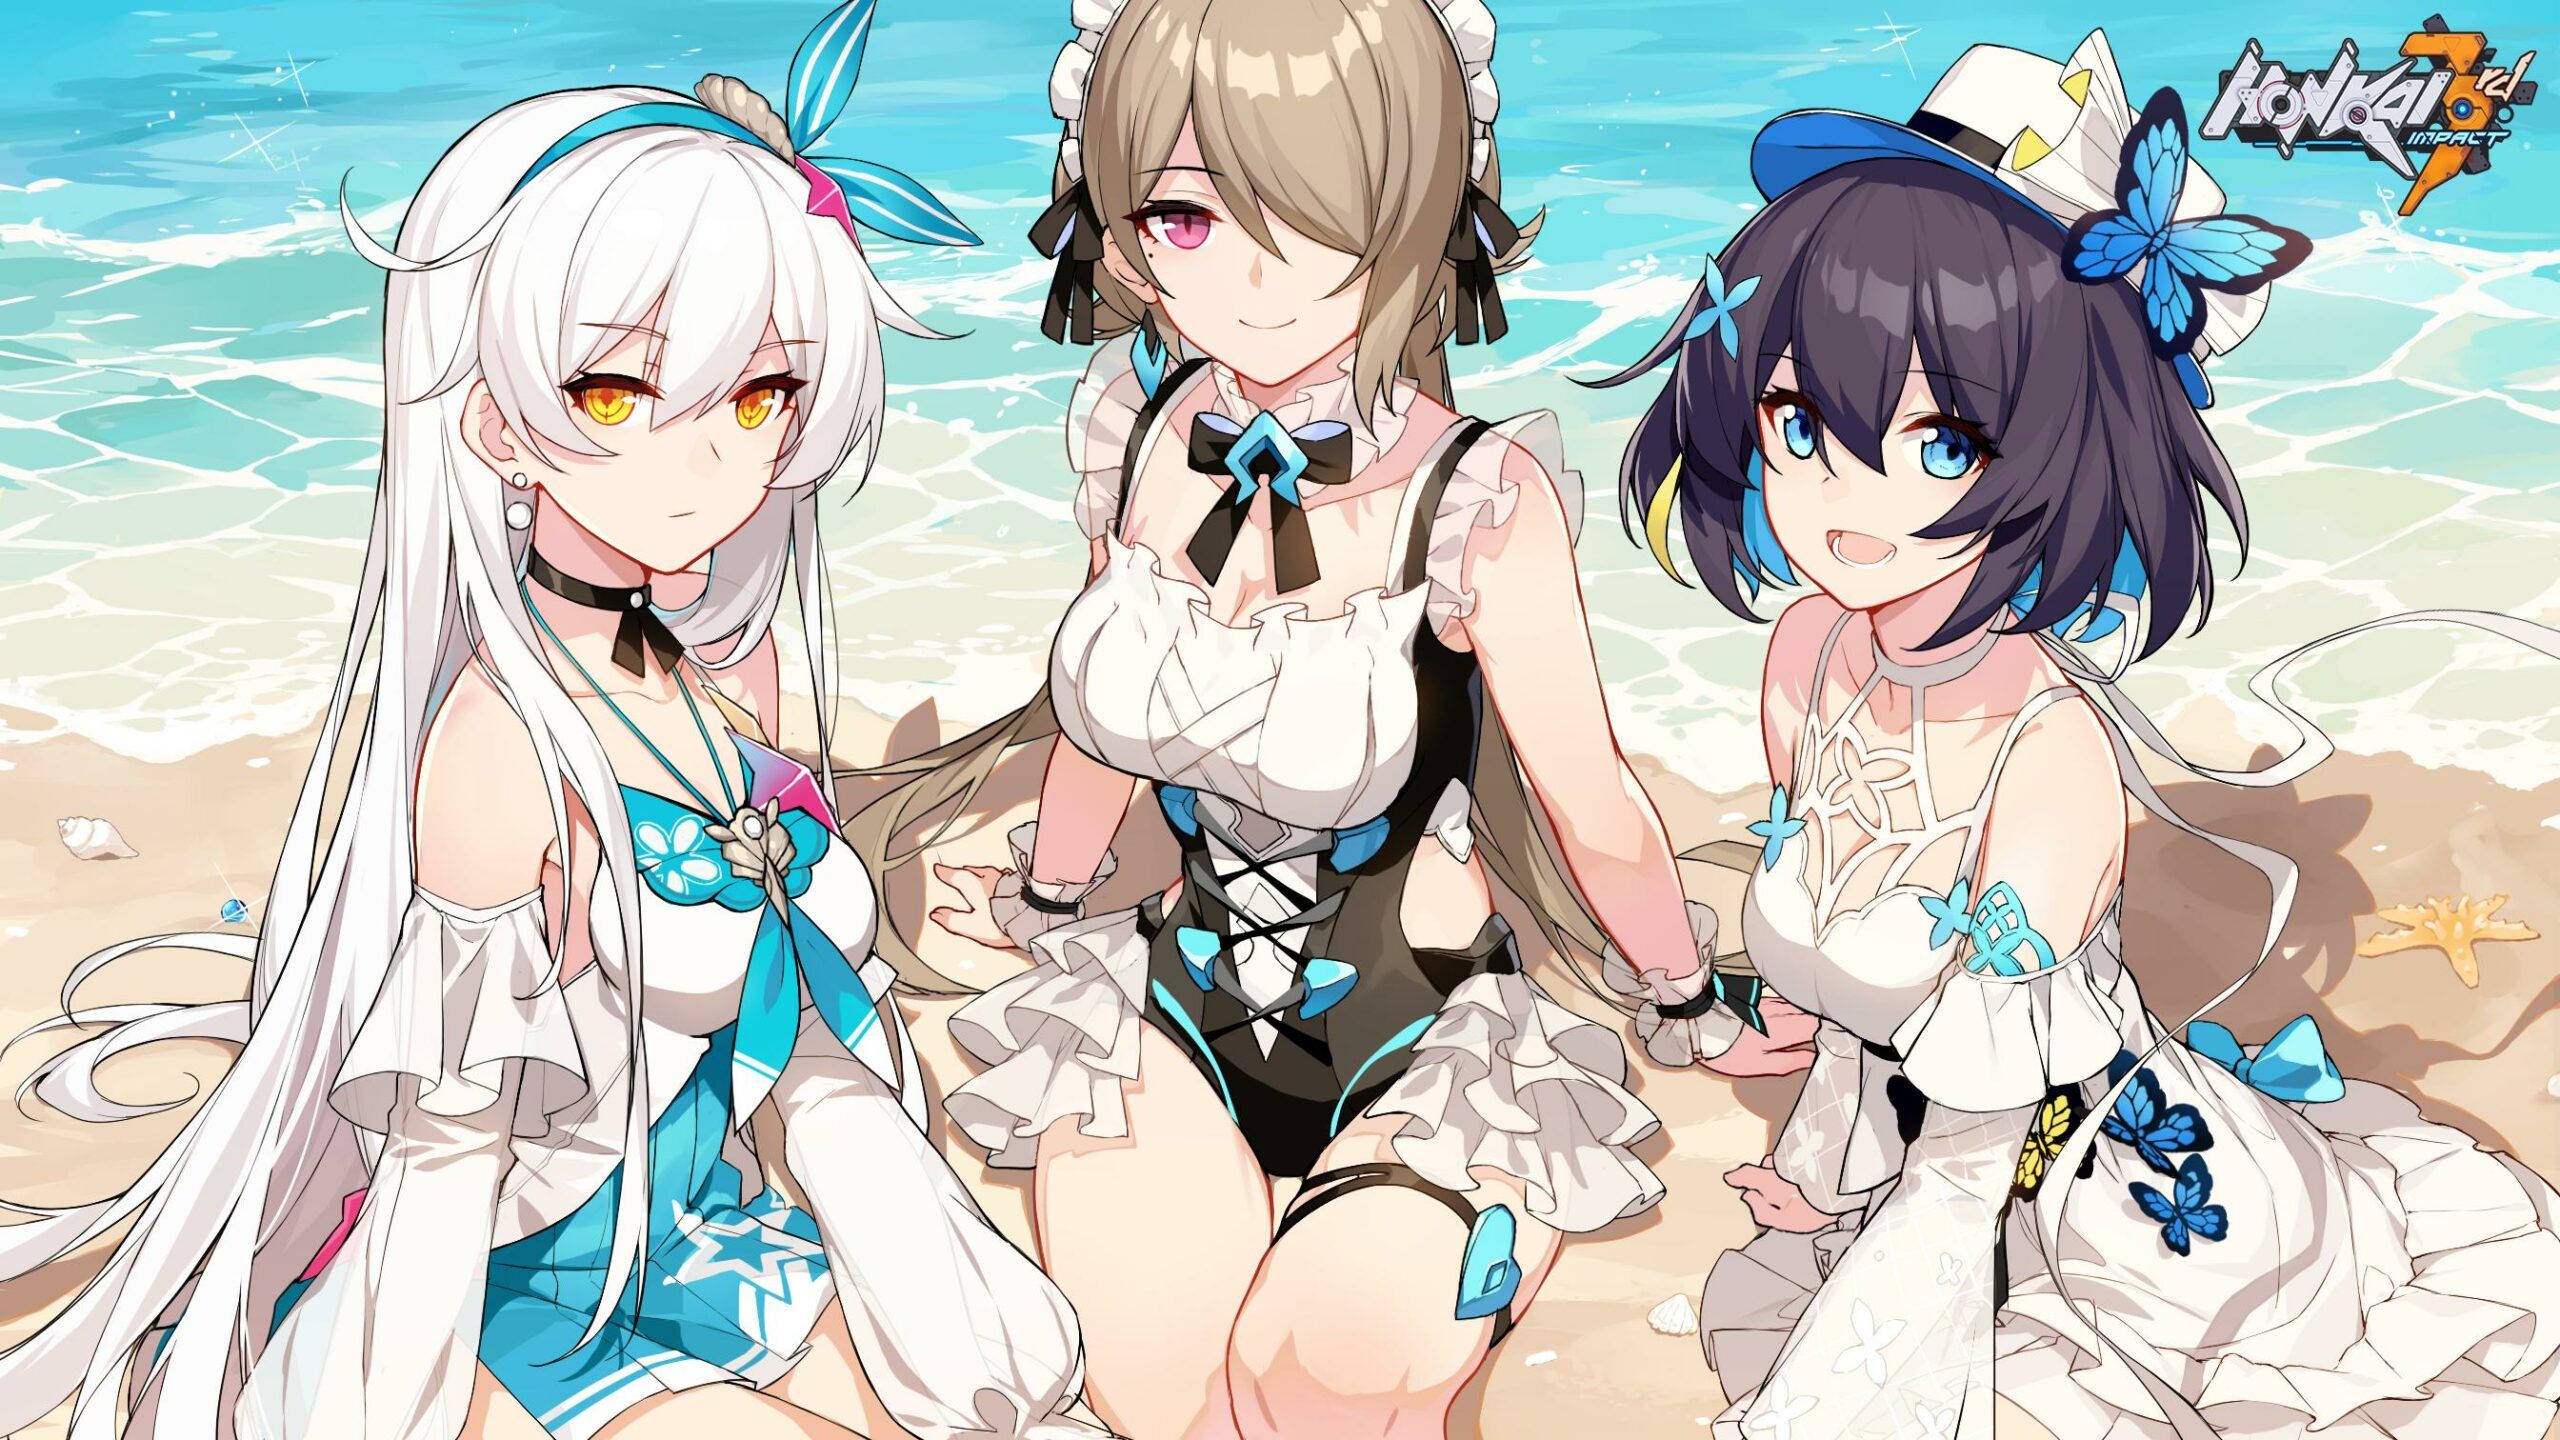 Honkai Impact 3rd void ria seele official art for the Honkai Star Rail story feature image